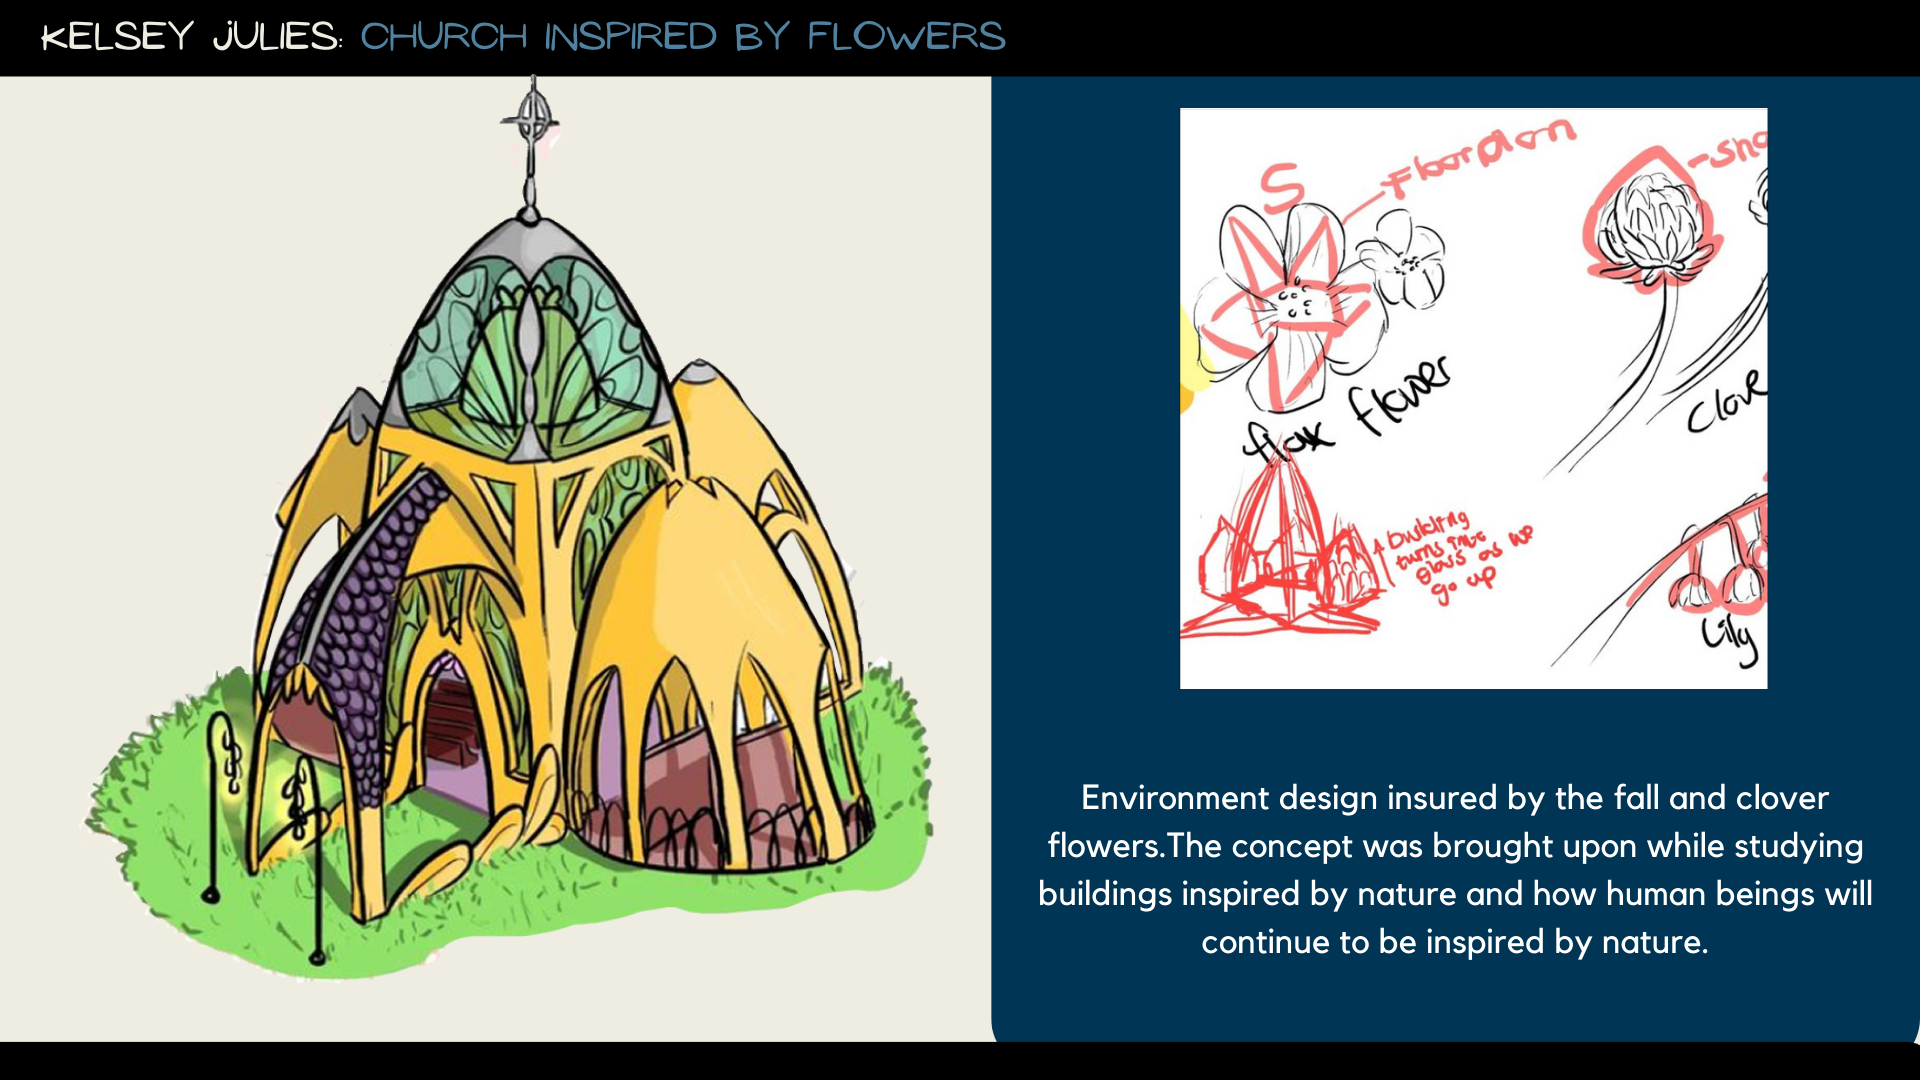 KELSEY JULIES

Environment design insured by the fall and clover
flowers.The concept was brought upon while studying
buildings inspired by nature and how human beings will
continue to be inspired by nature.